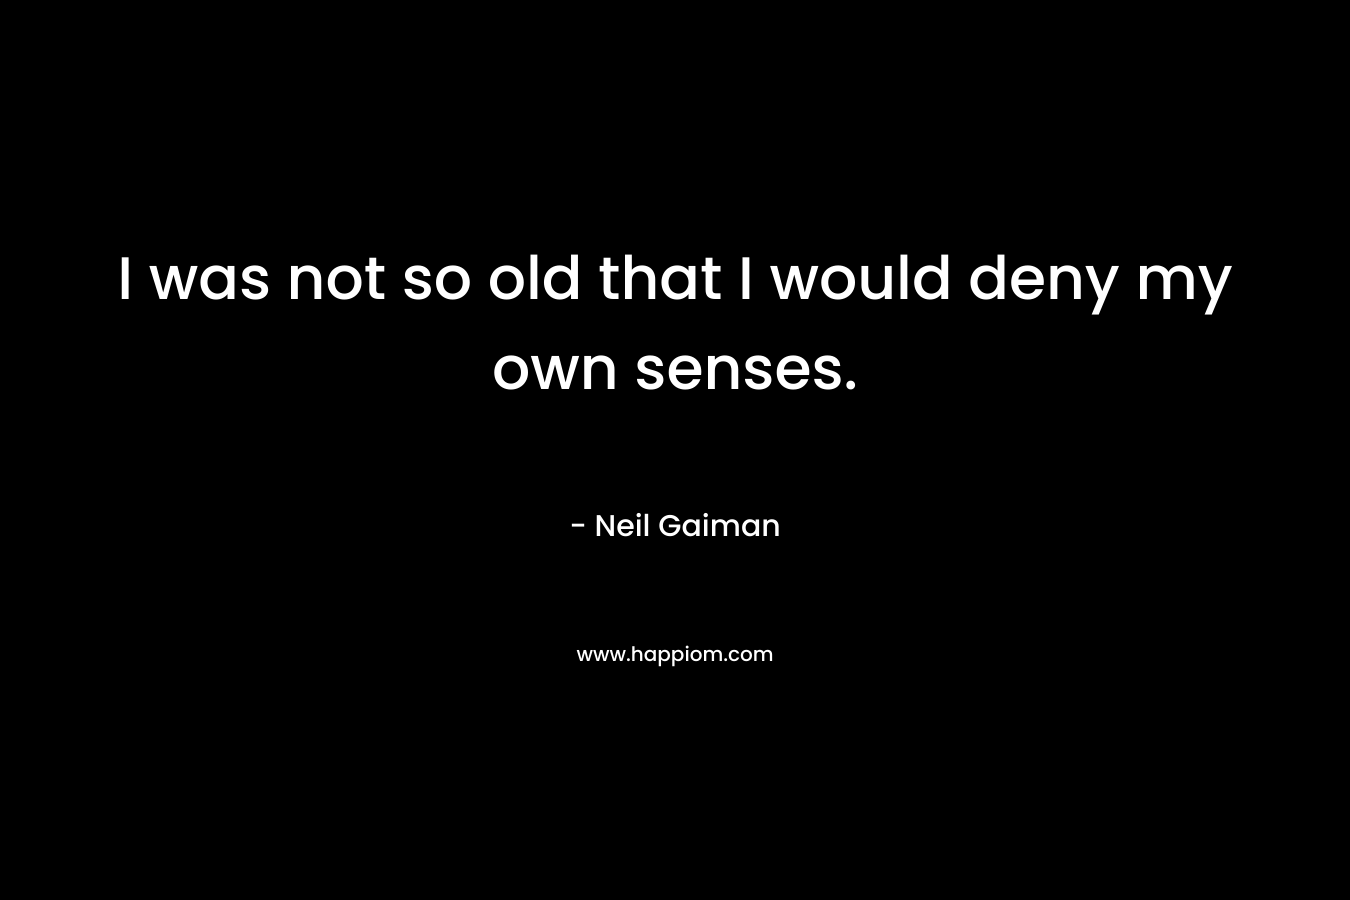 I was not so old that I would deny my own senses. – Neil Gaiman